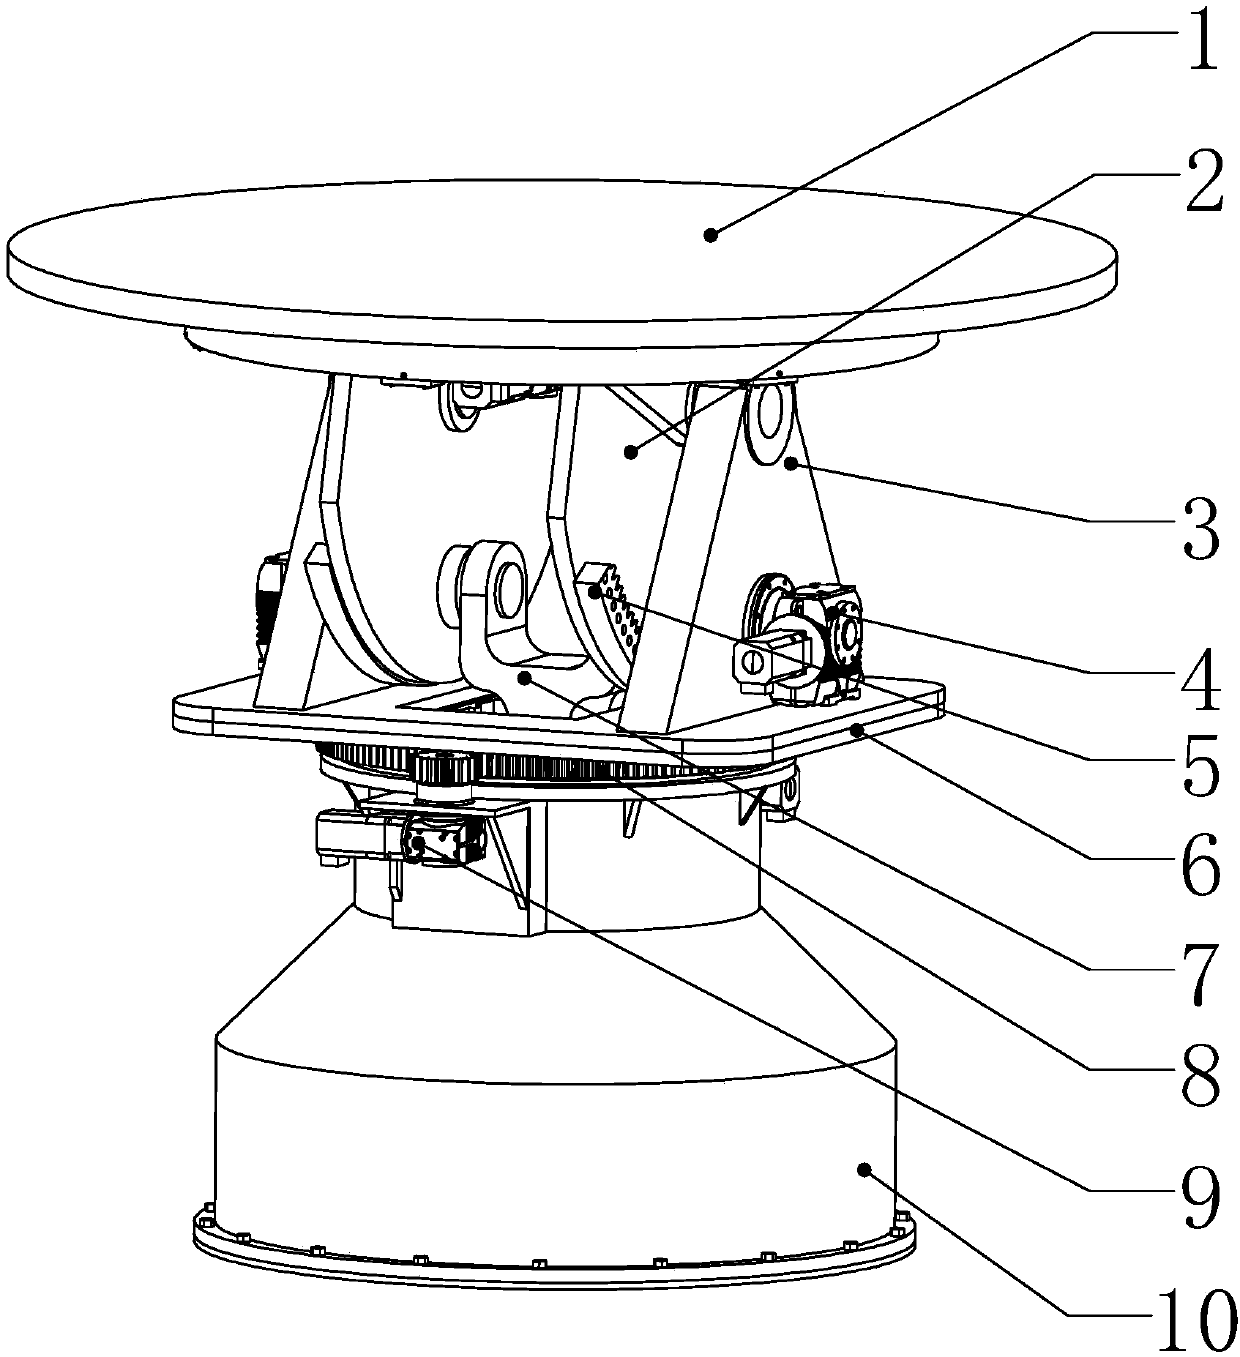 Heavy load three-dimensional rotating table capable of balancing overturning moment